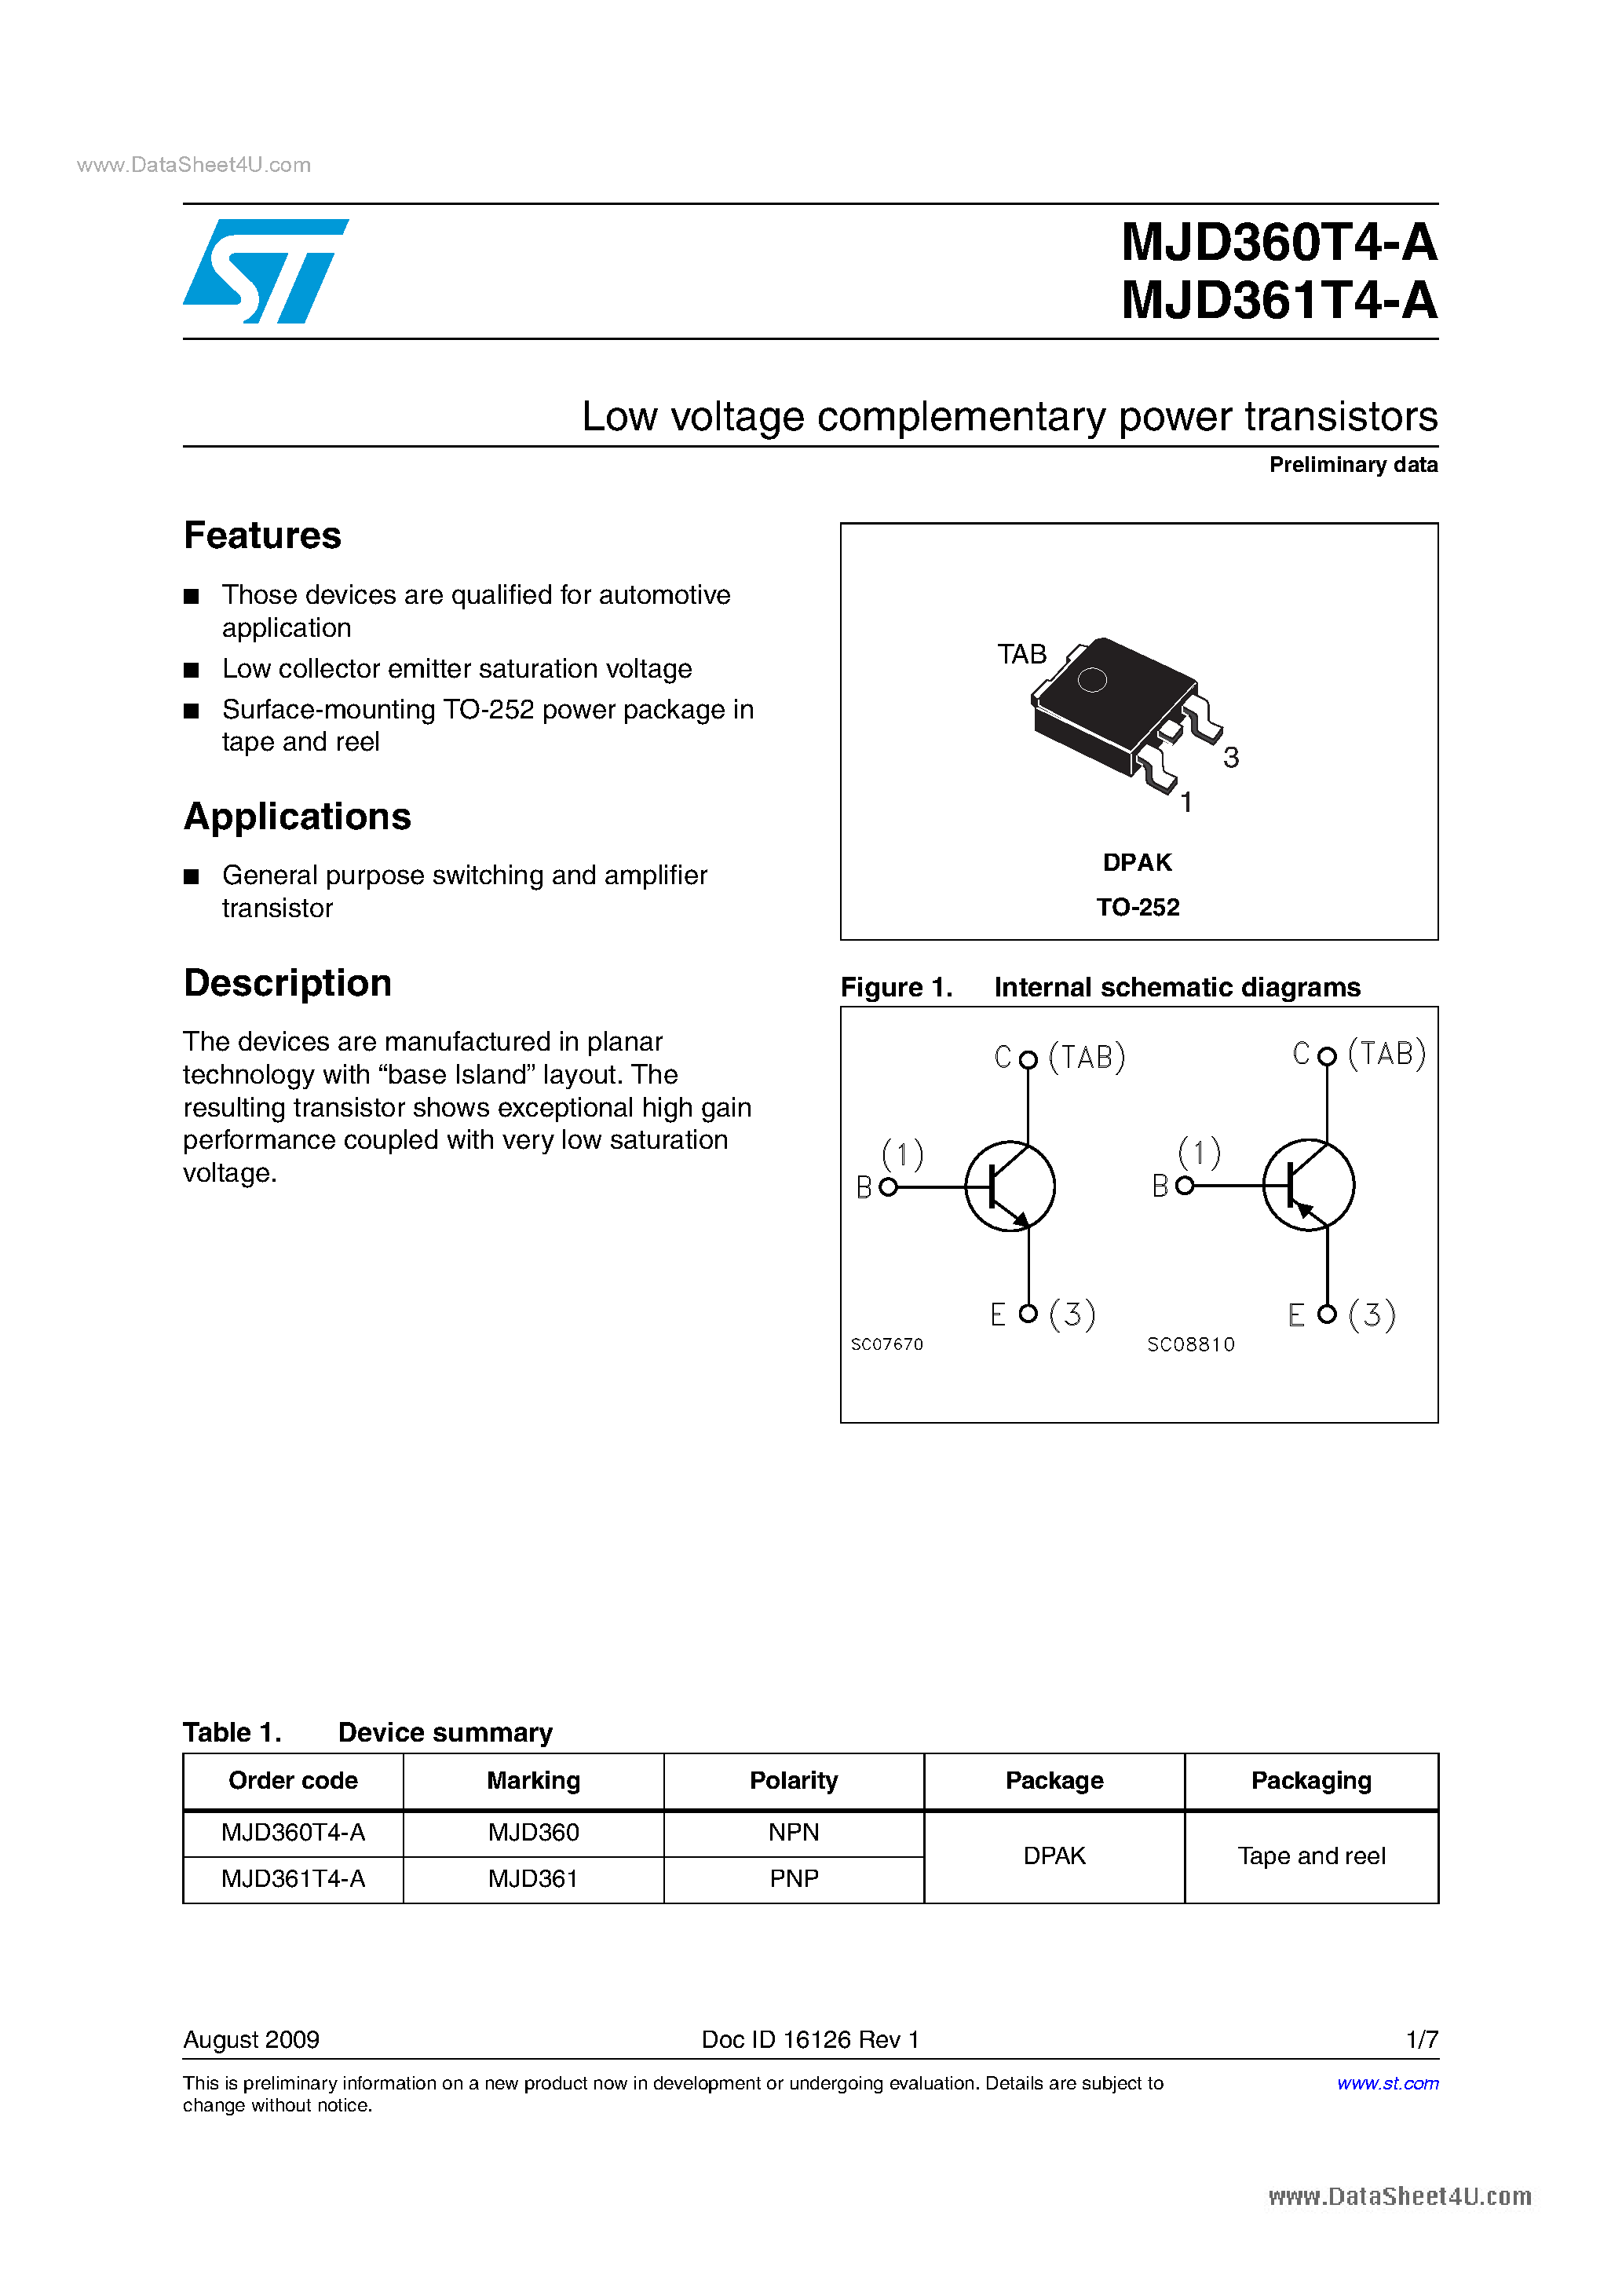 Datasheet MJD360T4-A - (MJD360T4-A / MJD361T4-A) Low Voltage Complementary Power Transistors page 1